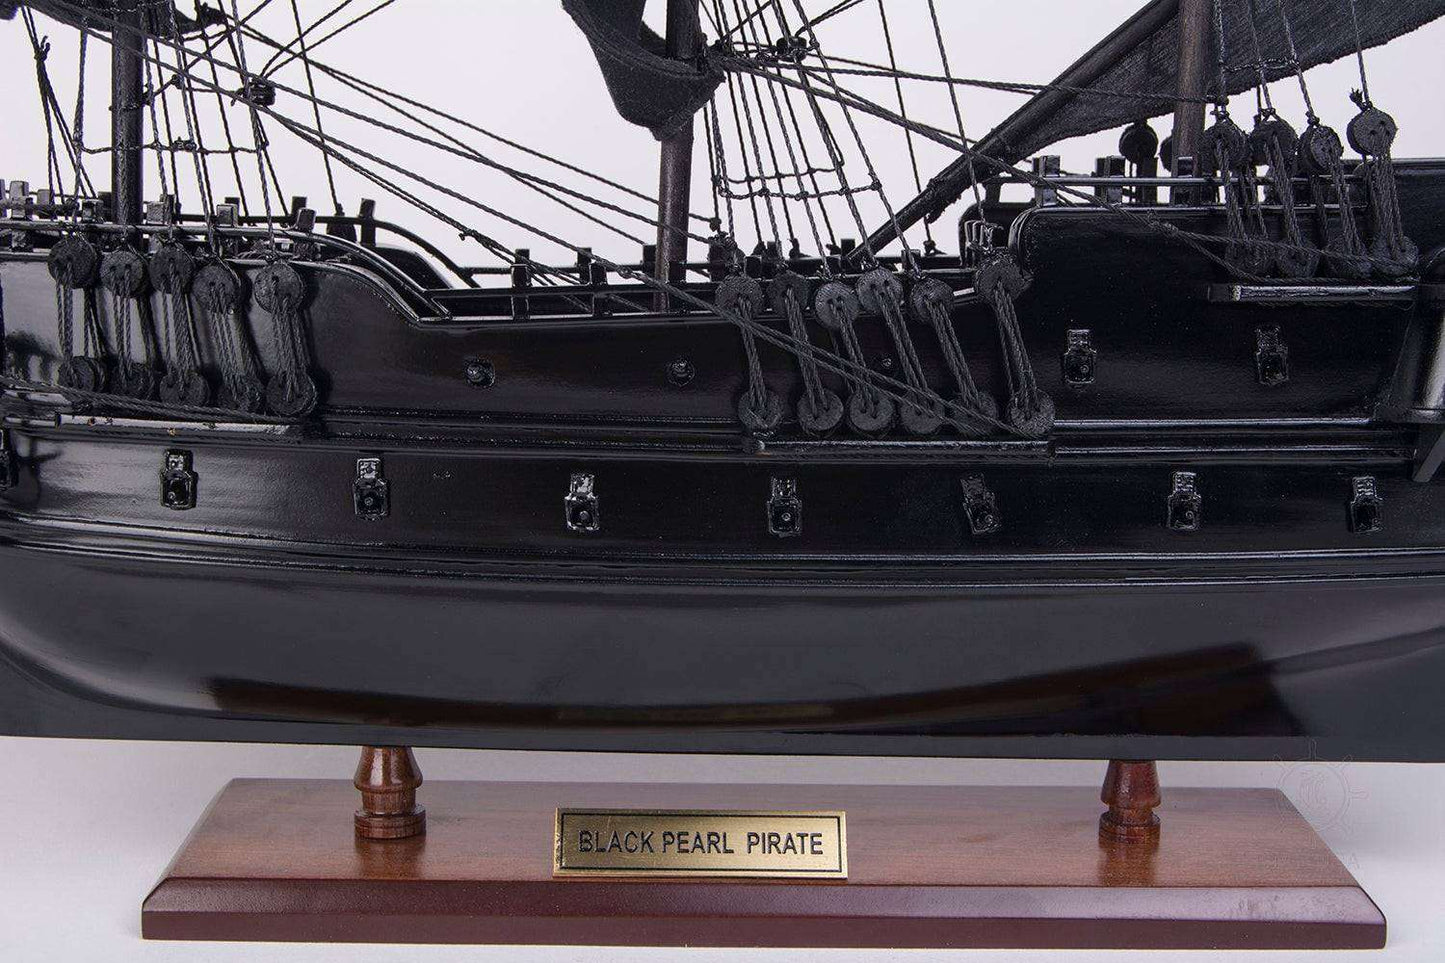 ALDO Hobbies & Creative Arts> Collectibles> Scale Model Black Pearl Pirates of The Caribbean Exclusive Edition Small Tall Ship Wood Model Sailboat Assembled